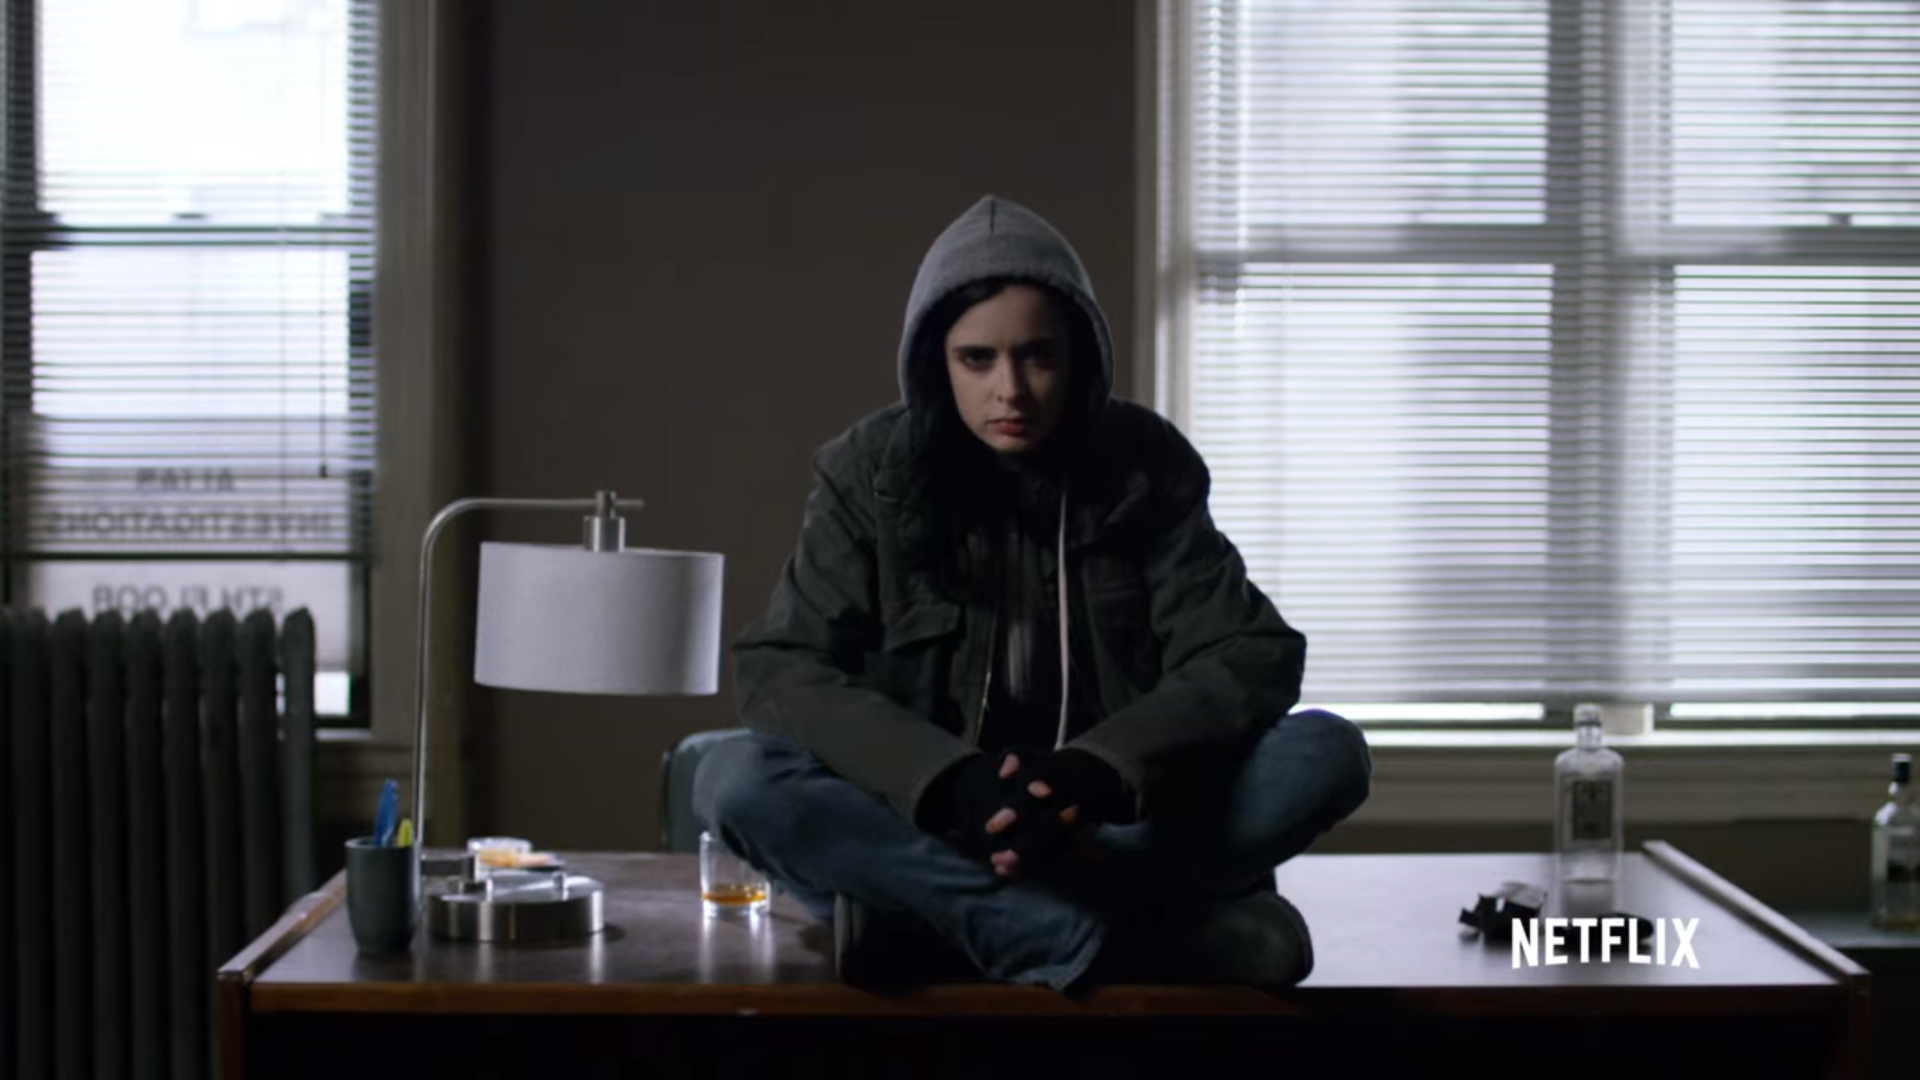 Let's Talk About The New Jessica Jones Trailer